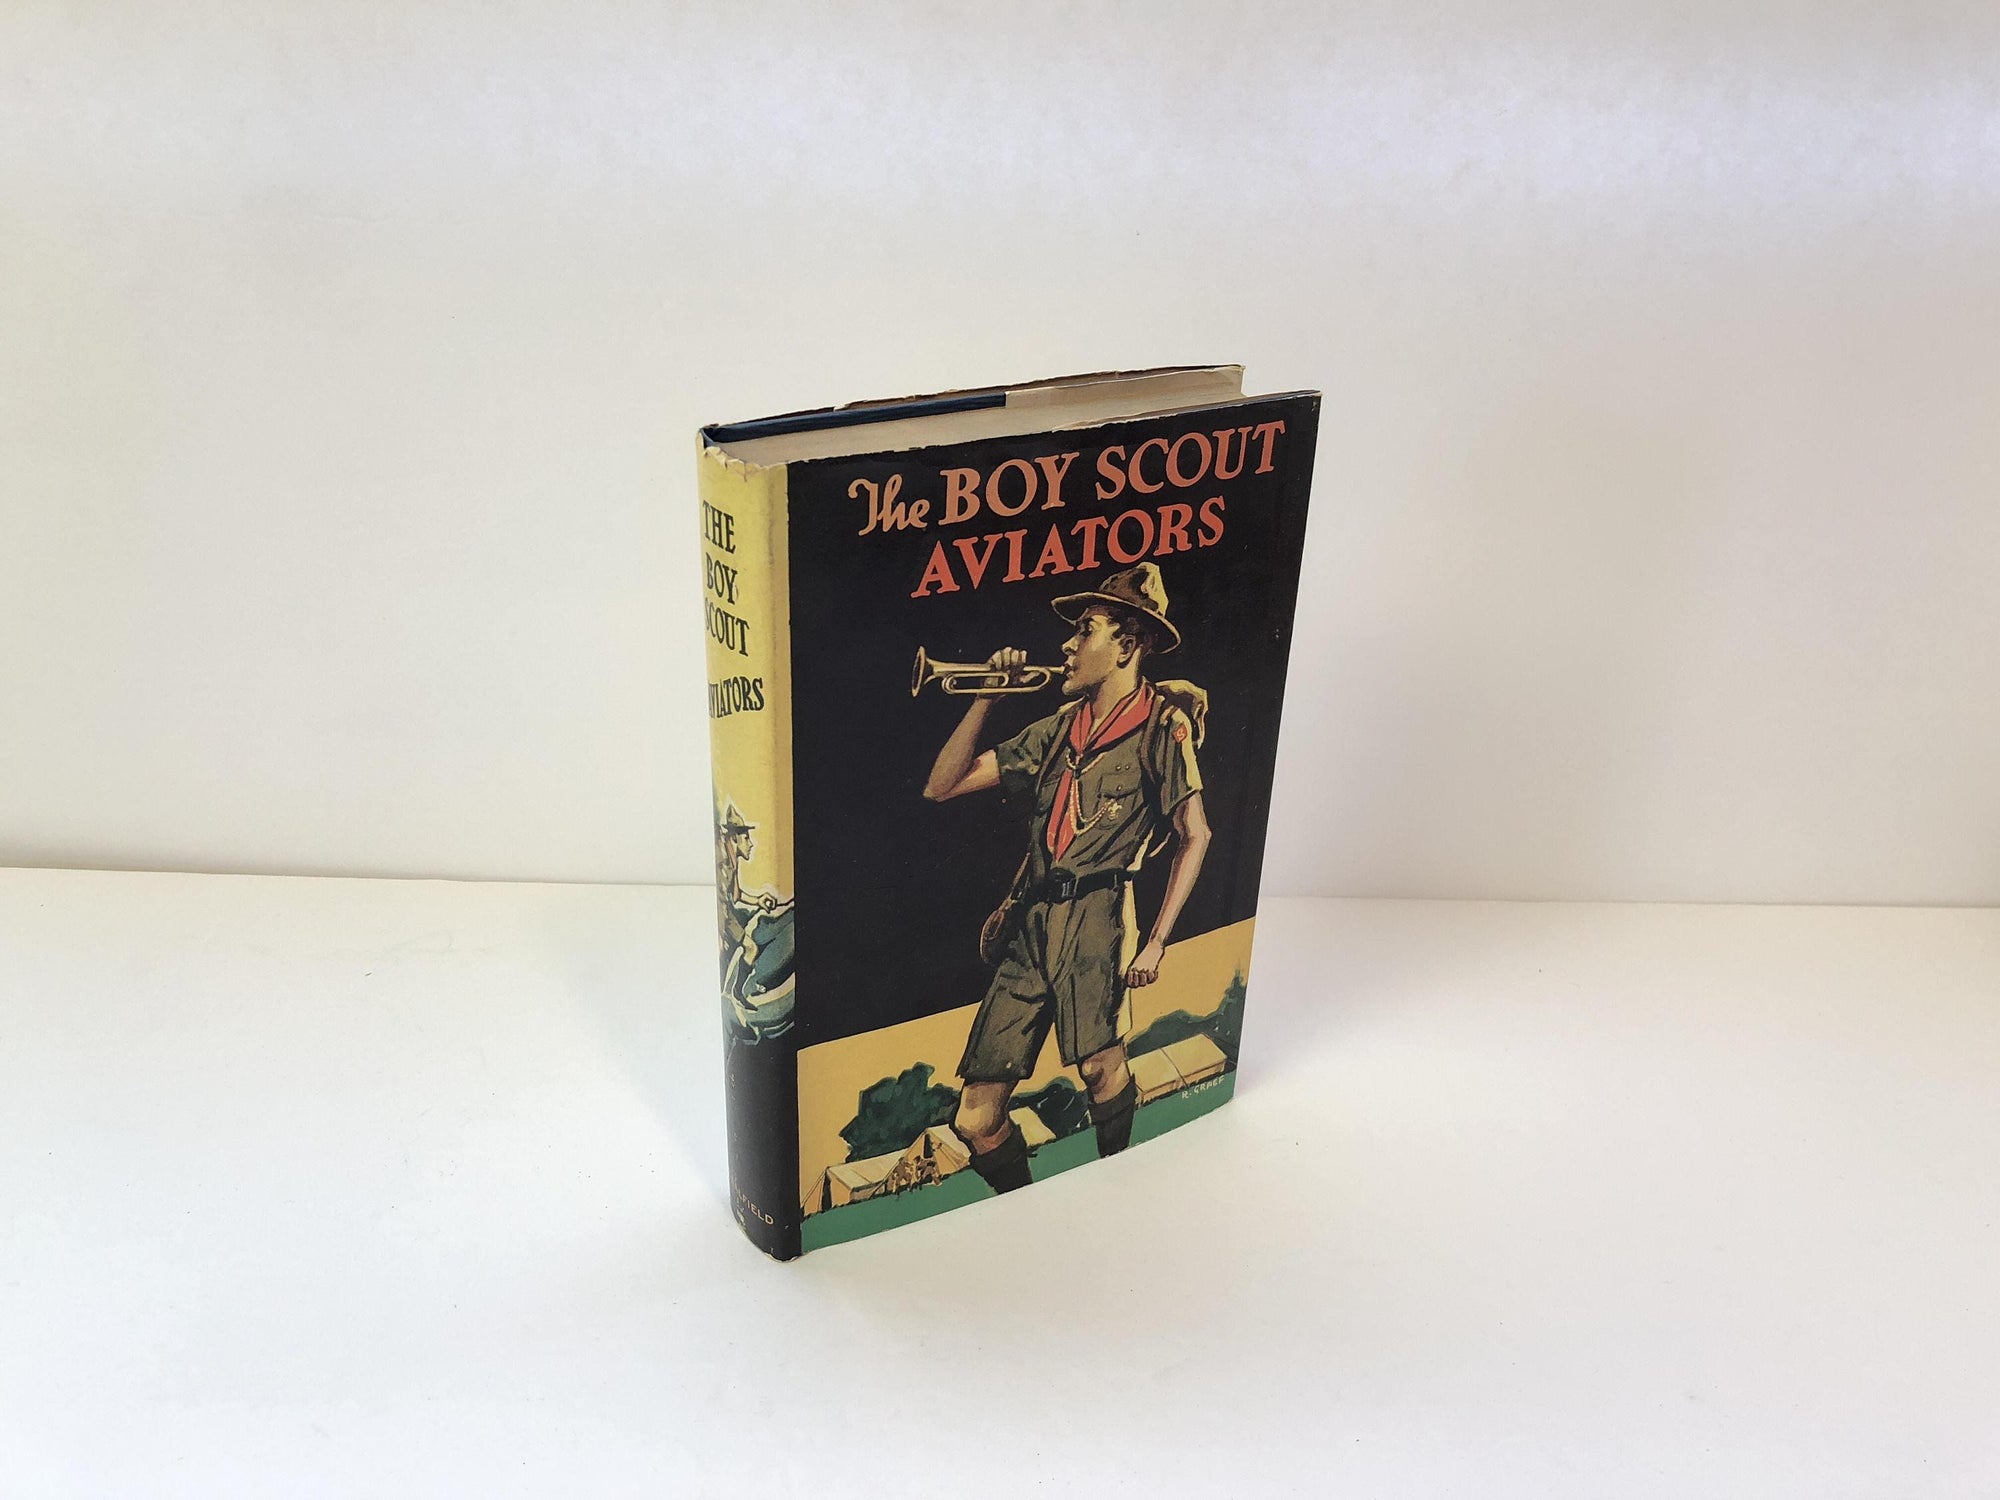 The Boy Scout Aviators by George Durston-1924  With Original Dust Jacket Vintage BookVintage Book